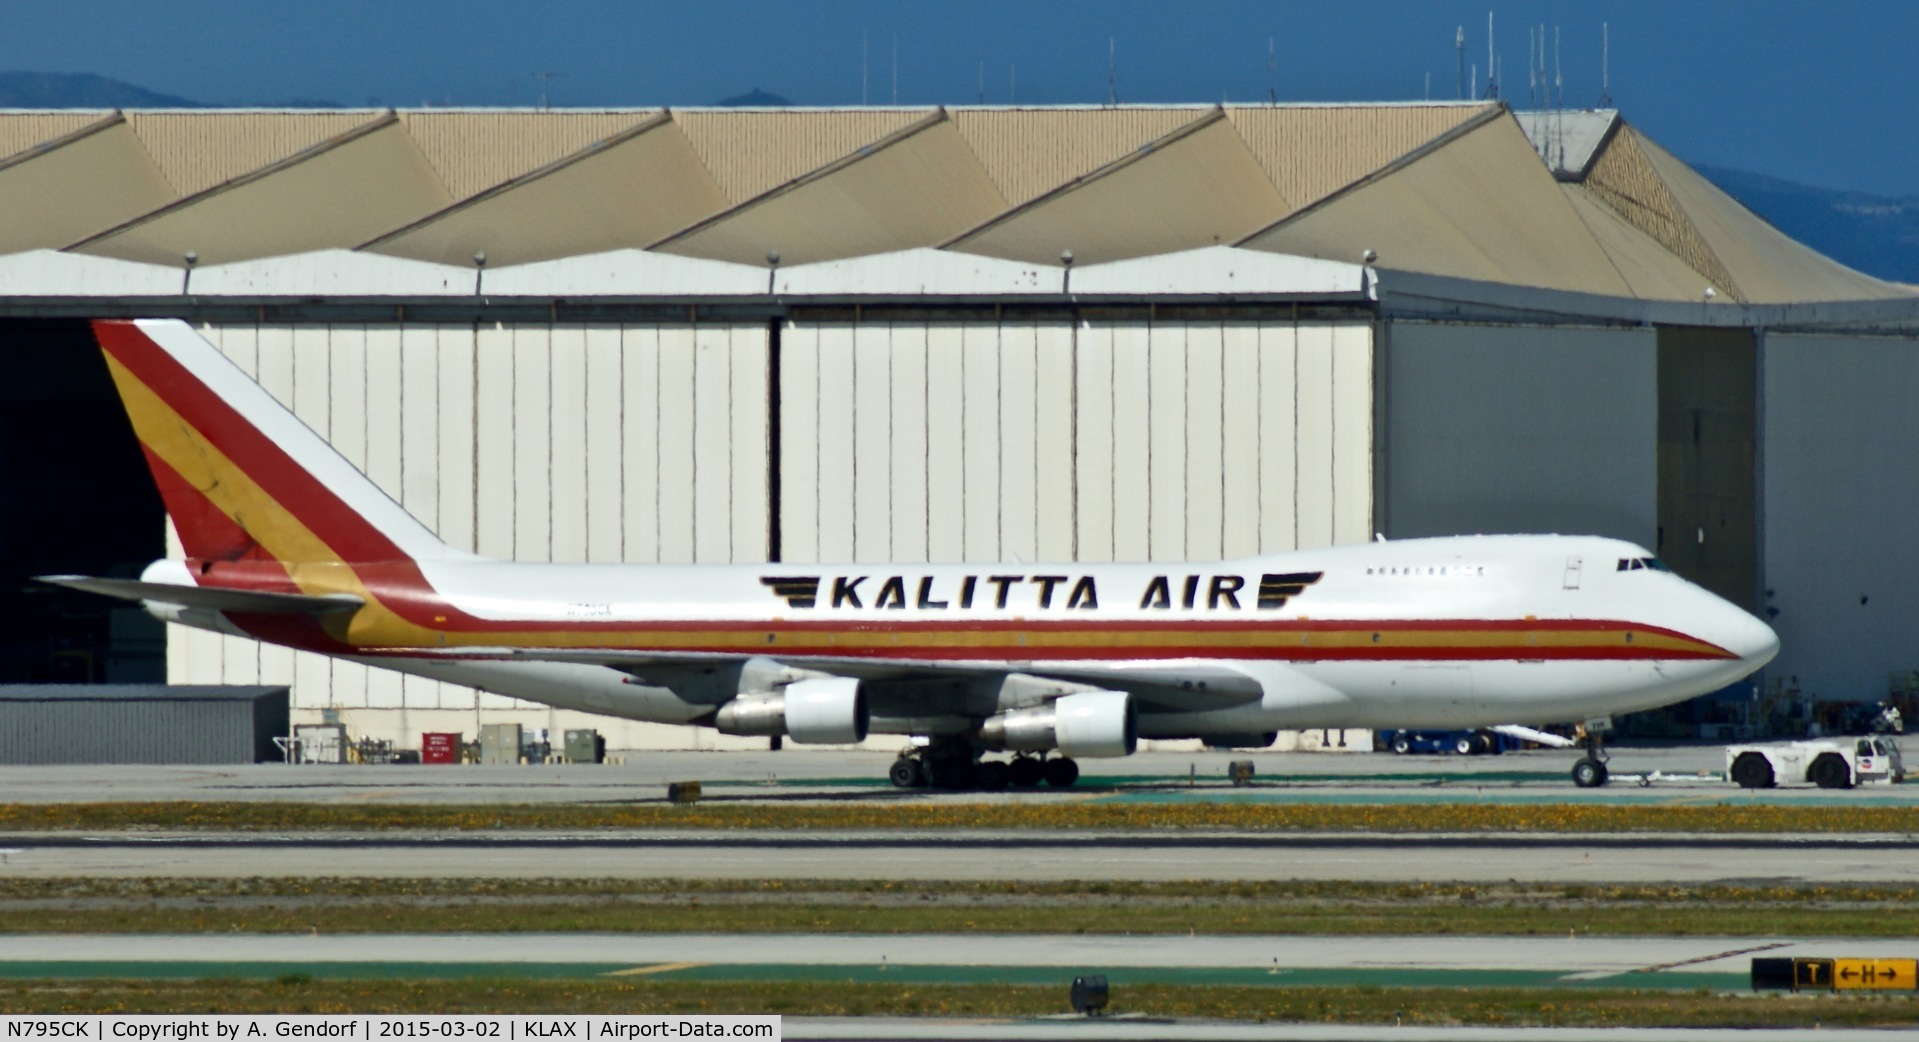 N795CK, 1984 Boeing 747-251B C/N 23111, Kalitta Air, a real classic, is here been towed to the cargo ramp at Los Angeles Int'l(KLAX)